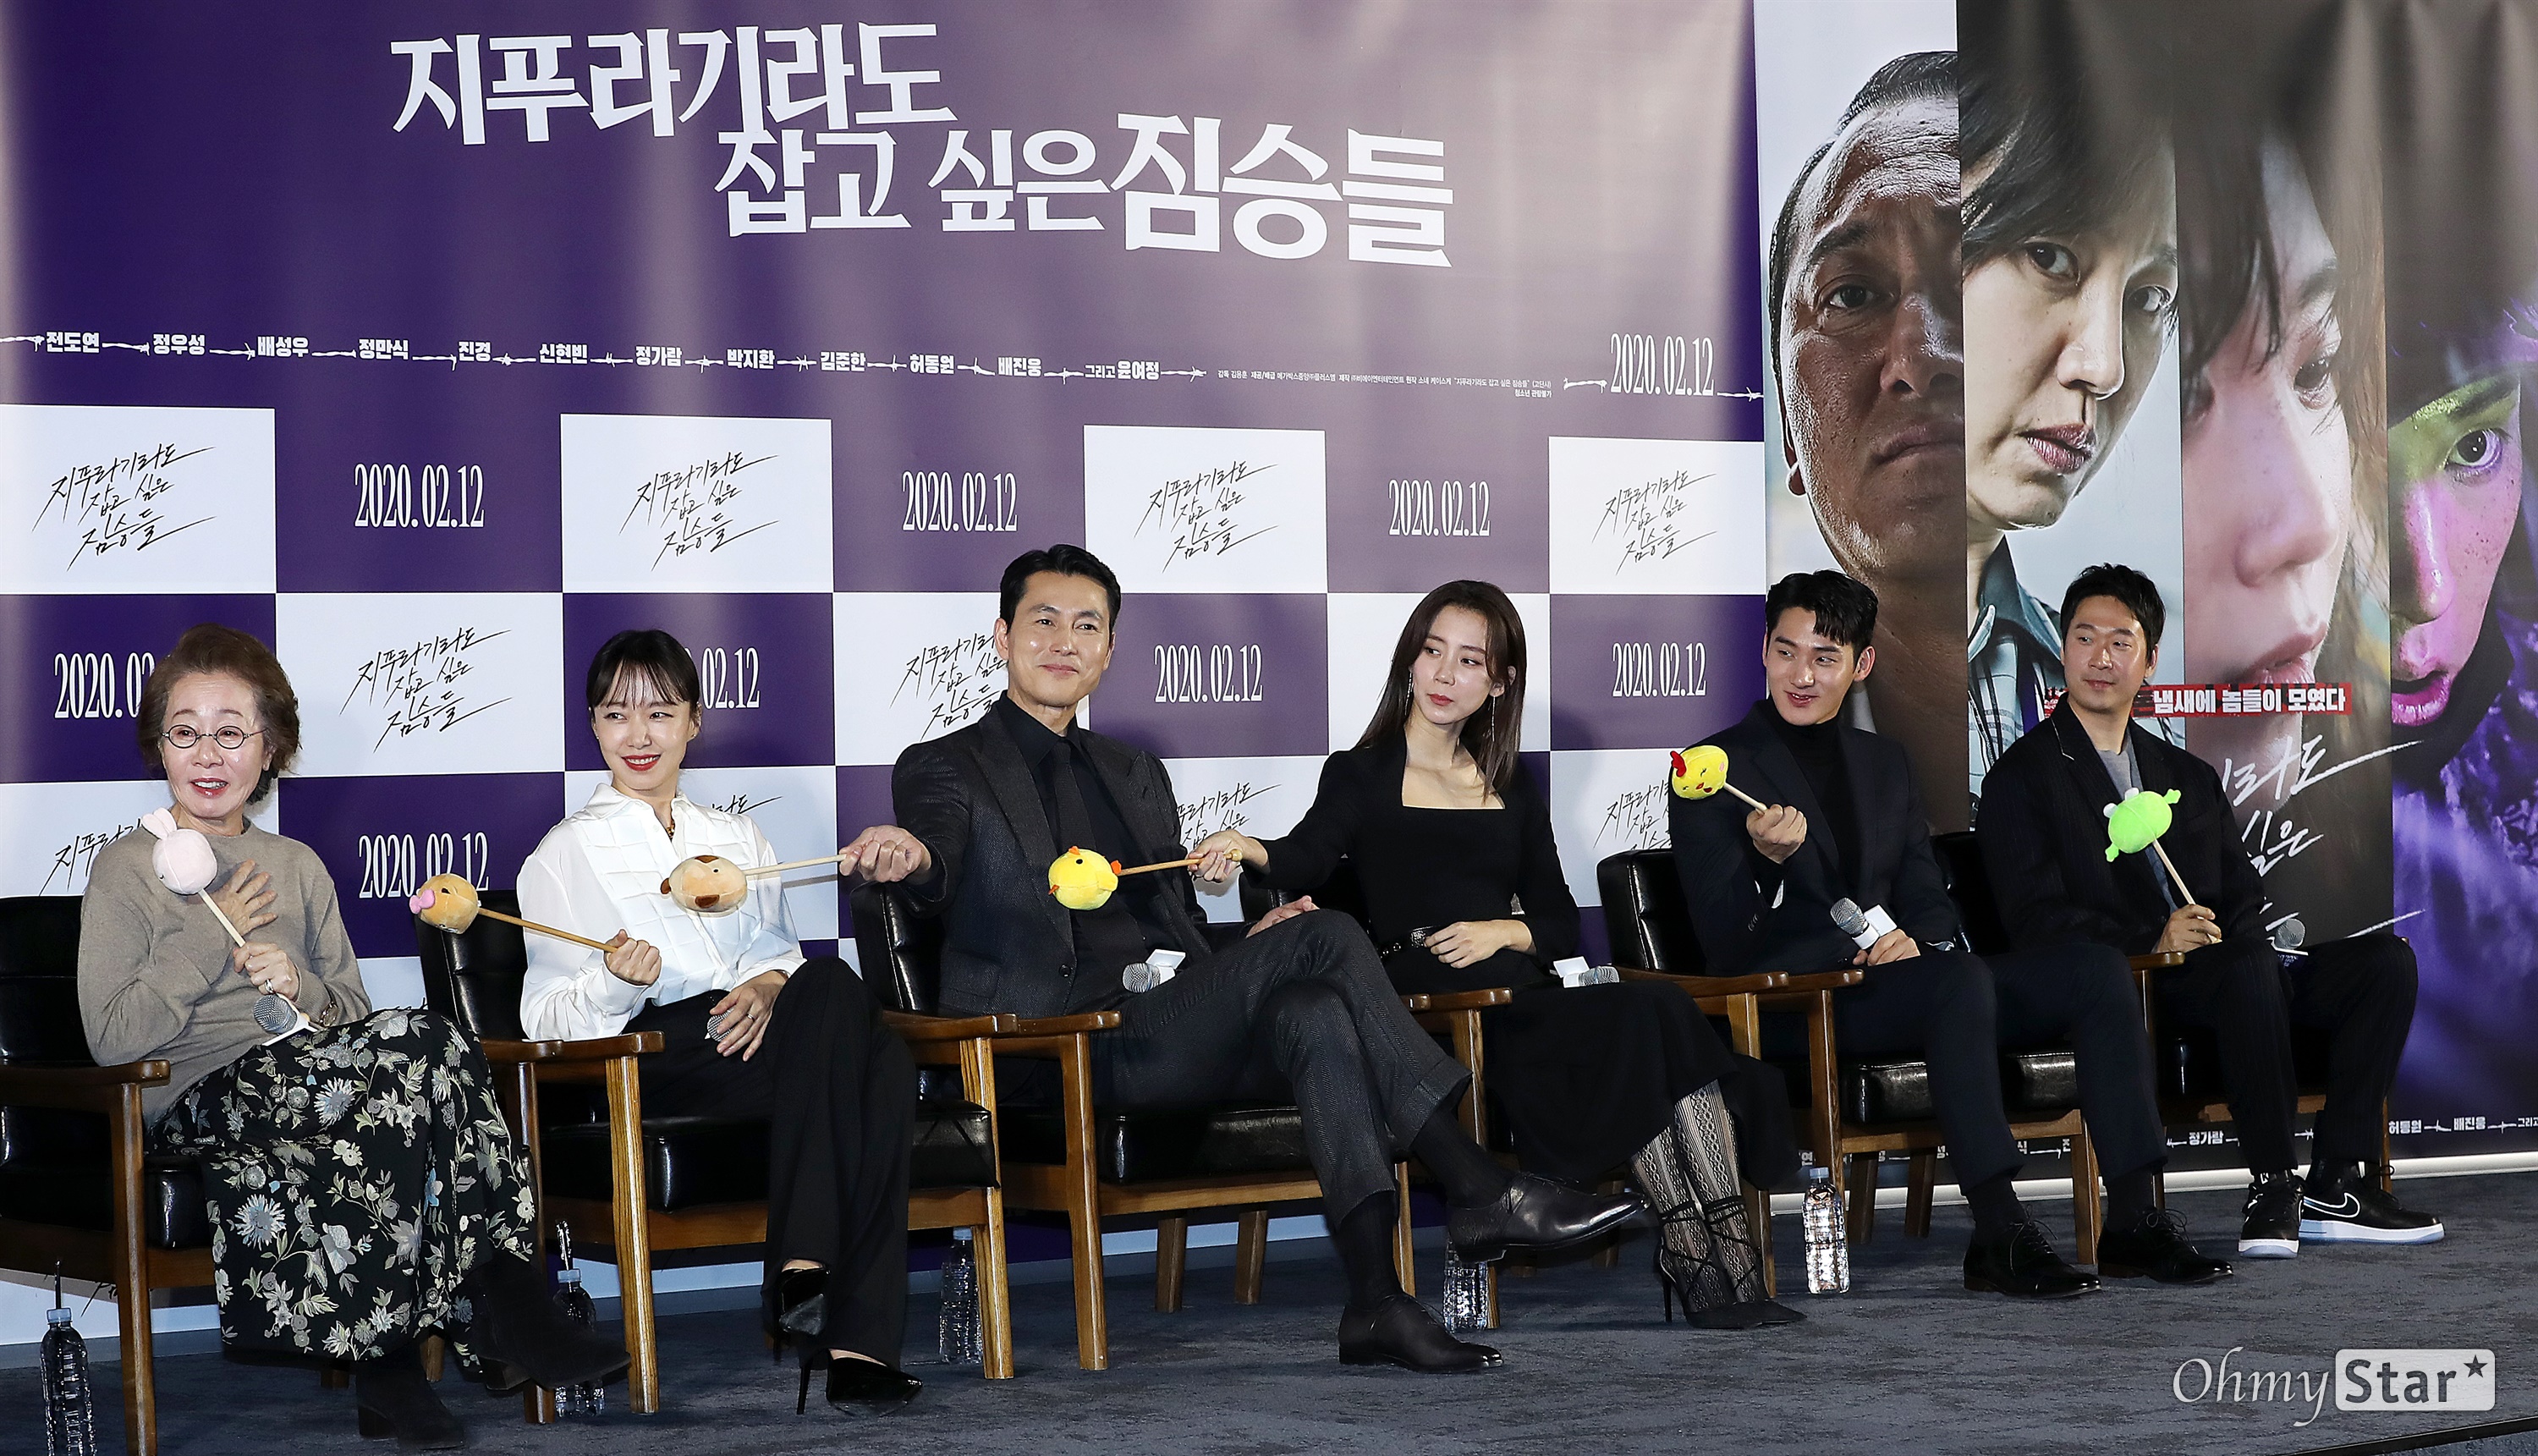 On the morning of the 13th, the production briefing session of the movie The Animals Wanting to Hold the Jeep was held at Megabox Seongsu, Seongdong-gu, Seoul.On the day, director Kim Yong-hoon, Actor Youn Yuh-jung (Soonja station), Jeon Do-yeon (Michelle Chen station), Jung Woo-sung (Taeyoung station), Shin Hyun-bin (Miran station), and Jeong Garam (Jintae station) attended the event.The film tells the stories of ordinary people struggling to take on money bags.Director Kim Yong-hoon, who directed the movie The Animals Who Want to Hold a Spray with the motif of the novel of the same name, said, The center of the story changes as each character takes over the story, not the story. He said.Jeon Do-yeon at Youn Yuh-jung, Jeon Do-yeon at Jung Woo-sungWhen Do Yeon-i did it, I just did it. (Youn Yuh-jung) I decided to appear because I wanted to be with Jeon Do-yeon.(Jung Woo-sung) said that Actor Youn Yuh-jung and Jung Woo-sung decided to appear in Because of the appearance of Jeon Do-yeon in a single voice.Jung Woo-sung of Taeyoung Station said, I felt like a friendly colleague because I watched Jeon Do-yeon through the movie from the beginning of my debut, but I decided to appear because I had never done my work together.I also found out that I had never worked with Jung Woo-sung in the field, said Jeon Do-yeon. I was sorry that it was over when I was getting used to each other because of the smoke breathing.Asked why he chose the work, Jeon Do-yeon said: Once the script was fun, the dramatic compositions, not the obvious crime, were fresh.As soon as he saw the character in the script, Actor Youn Yuh-jung came to mind, and Jeon Do-yeon immediately contacted Youn Yuh-jung and said he proposed to appear as a movie that teacher should do.I tried to play it naturally with the best of my strength because there were so strong Feelings on the character, said Jeon Do-yeon, who responded to the role of Michelle Chen, who played her role. I especially kept this part in mind because Michelle Chen, who is loved by a man, and Michelle Chen, who works as a bar president, is completely different.And the pressure of luxury casting.In the praise of the director, Youn Yuh-jung said, I often see a lot of cases where newcomers are really good at acting these days. I am fighting such a dilemma because I do not have such freshness.I think that the older I get, the better I want to smoke. Kim Yong-hoon said, The process of moving the unique story development method allowed only in novels to the movie was the biggest worry. It was important to give ordinary and common Feelings Especially, it was the biggest task for the production team to make Jung Woo-sung, which is a poisonous appearance, even if you try to put on the costume of old and old Feelings to express tired workers.Jung Woo-sung said, It is a dilemma of all the costume chiefs.The Movie The Animals Want to Hold the Spray Production Briefing Session